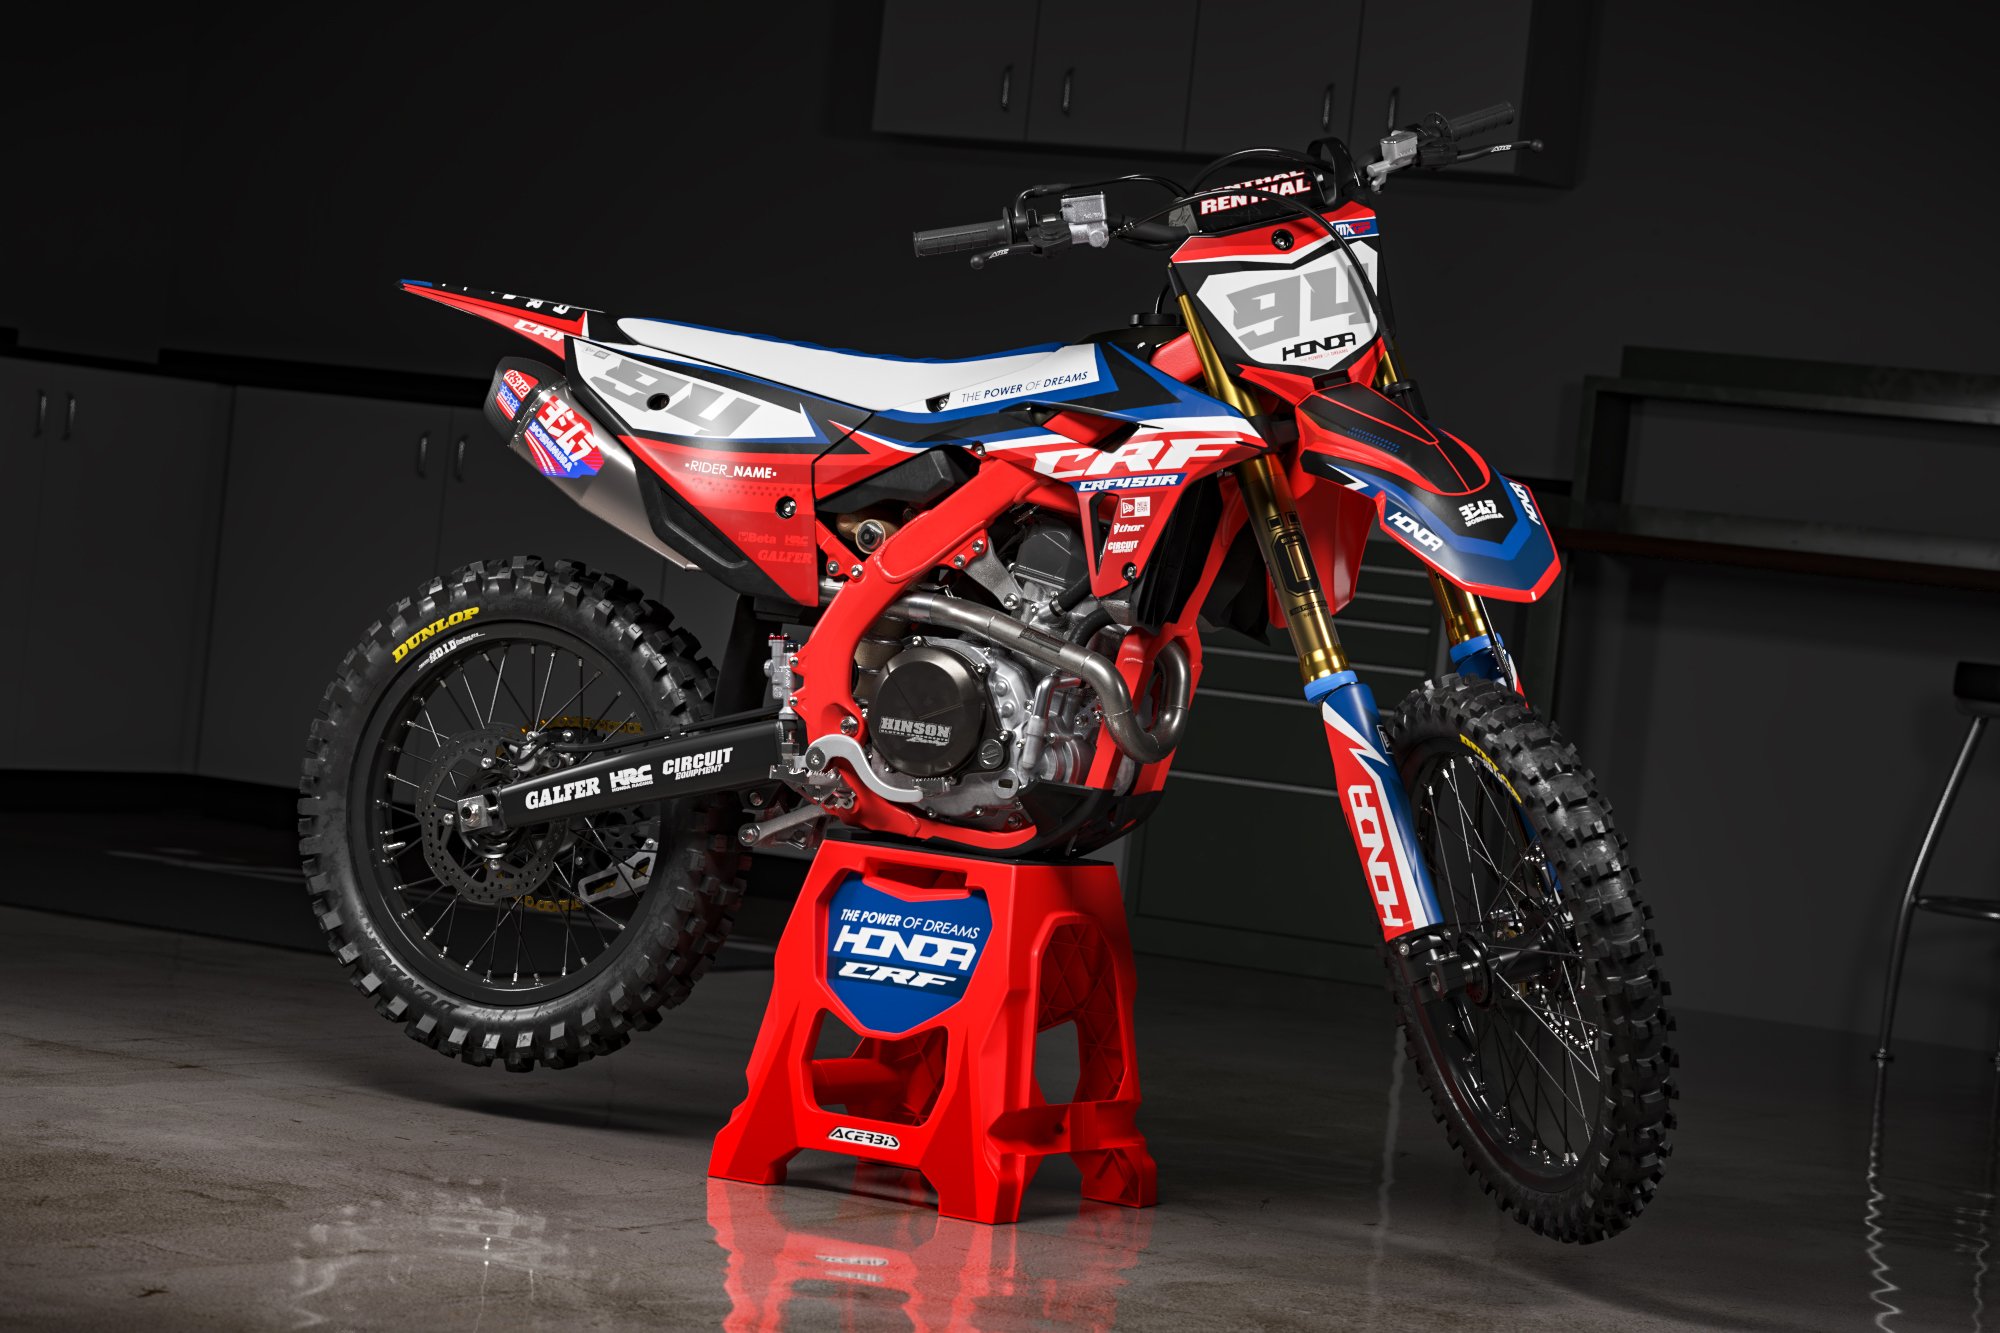 HONDA CRF450 2021 , verified & testfitted vector (.AI, .EPS, .CDR). Instant download. Guaranteed perfect fitment. All made by the same person since 2015